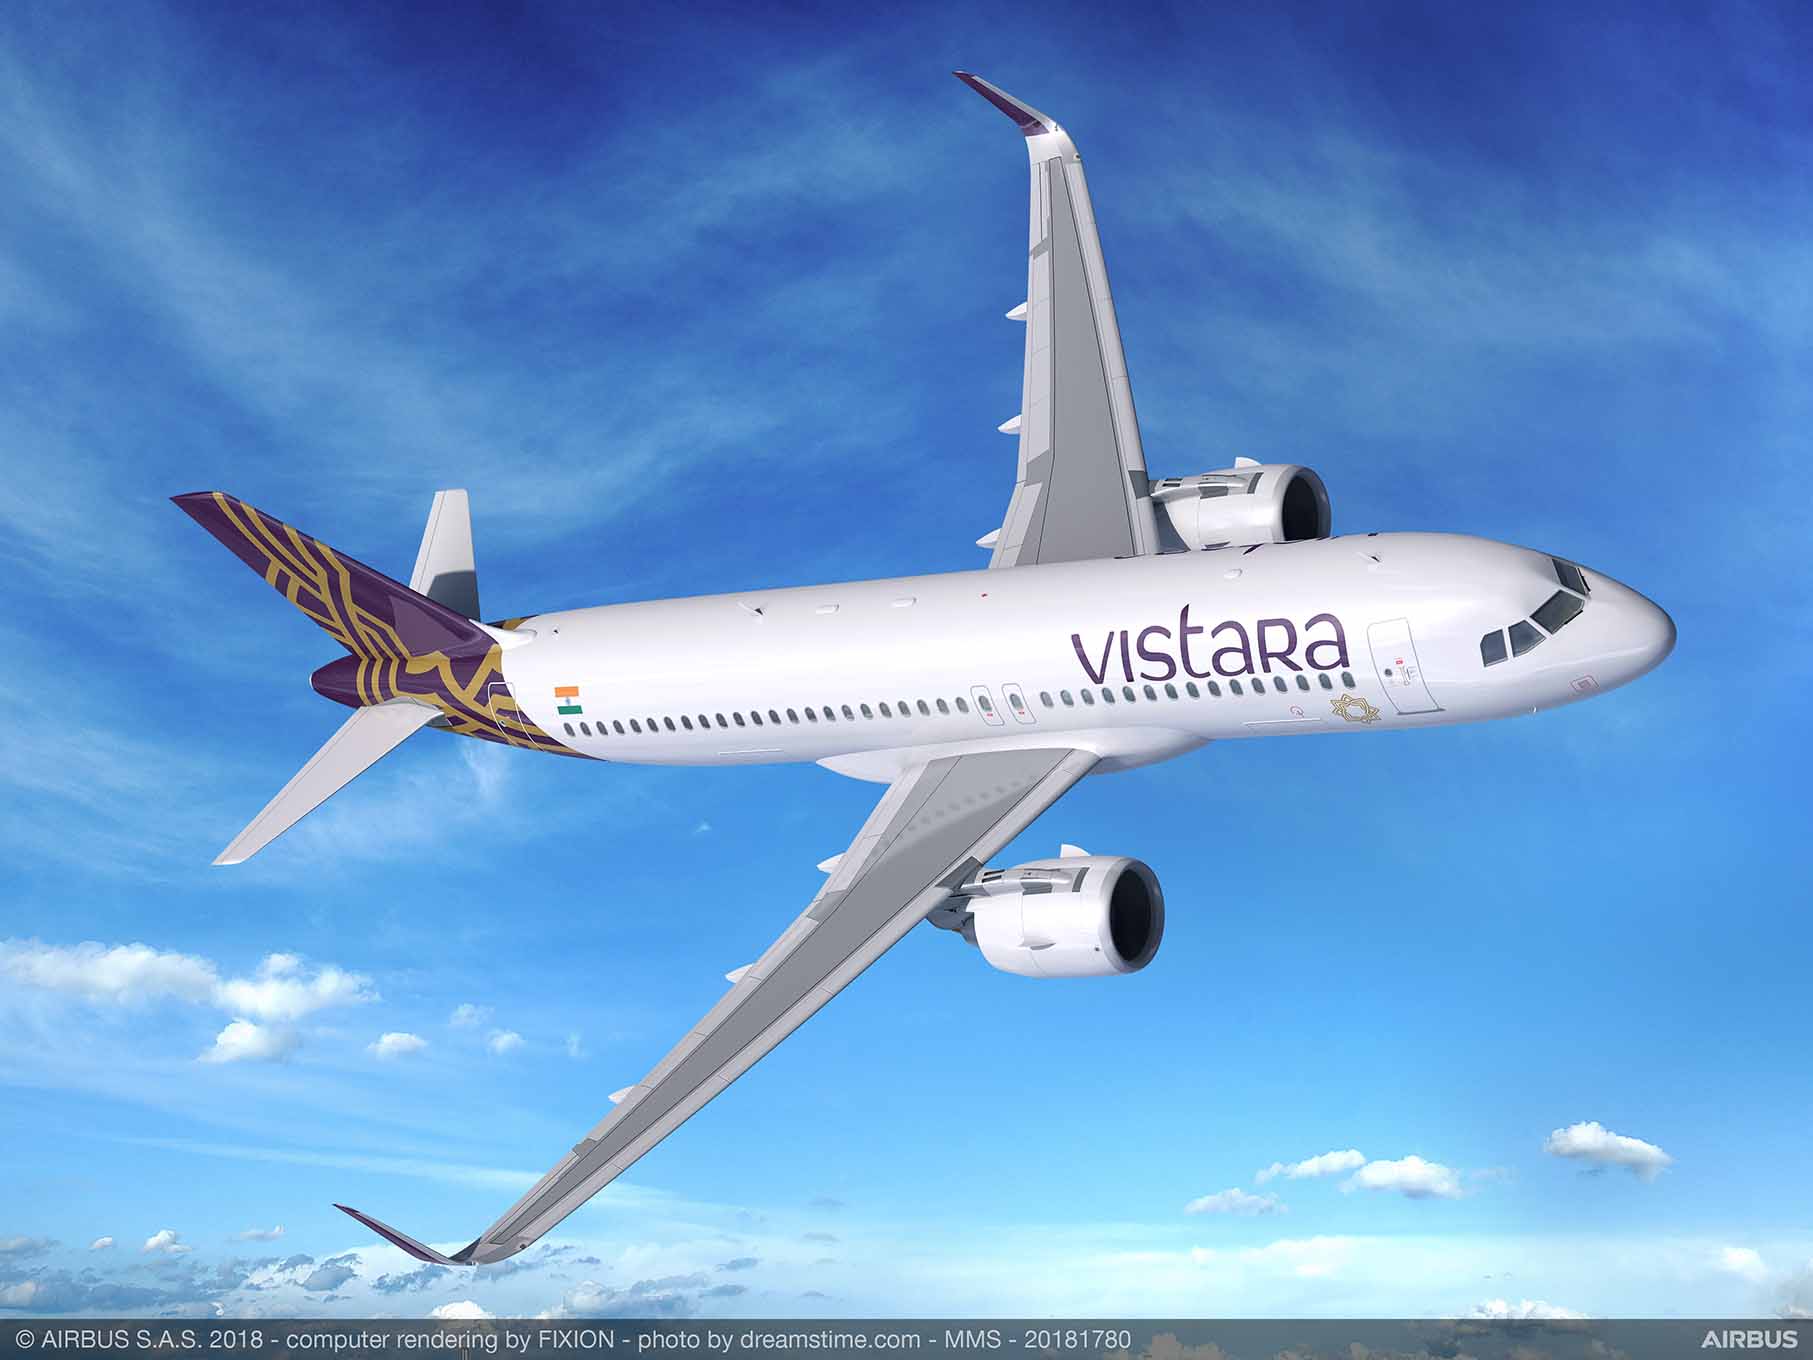 Is Vistara and Air India merger plan on fast track?